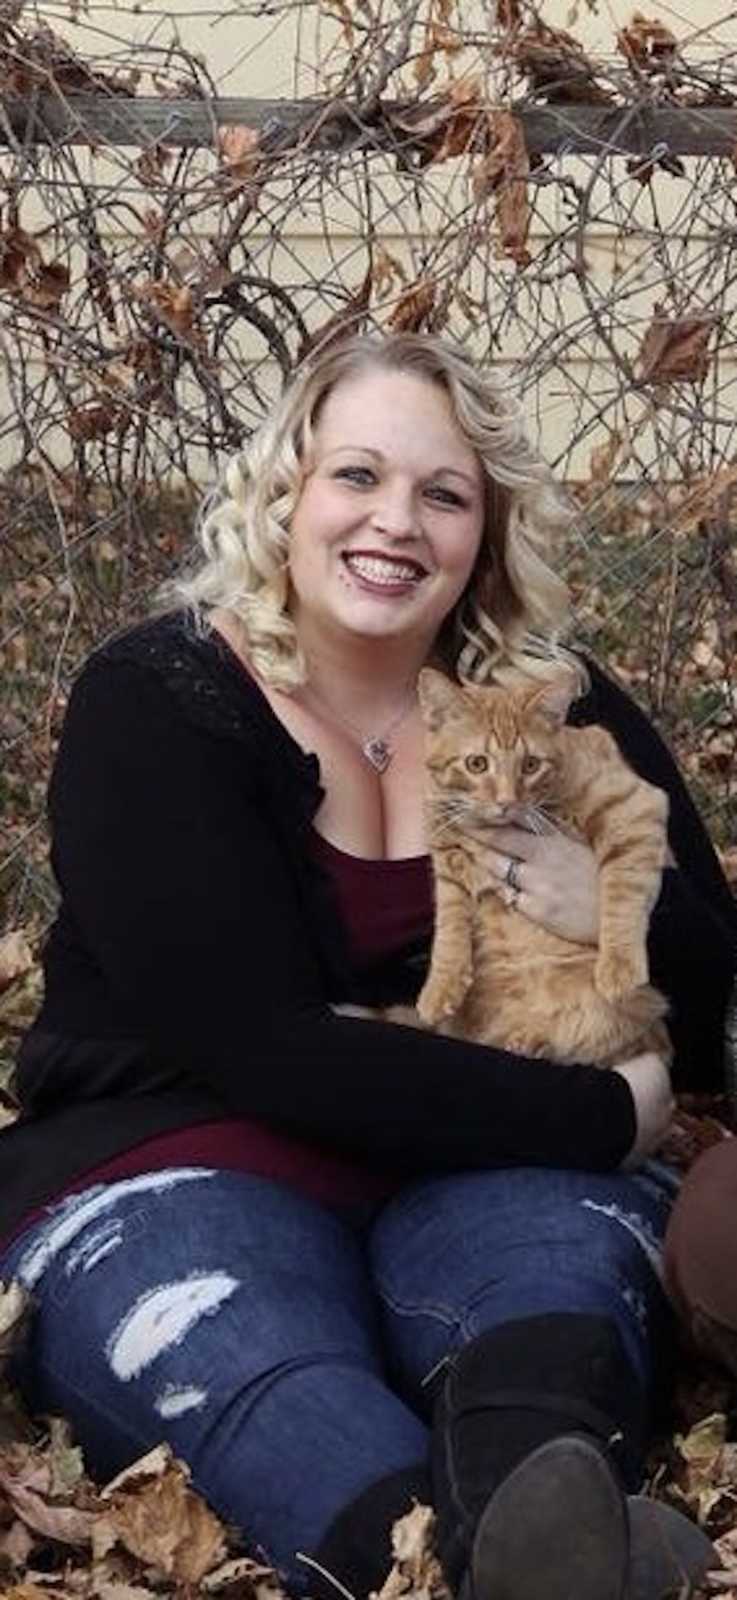 Woman who got a tattoo to cover her scars from cutting herself sits smiling with cat in her lap